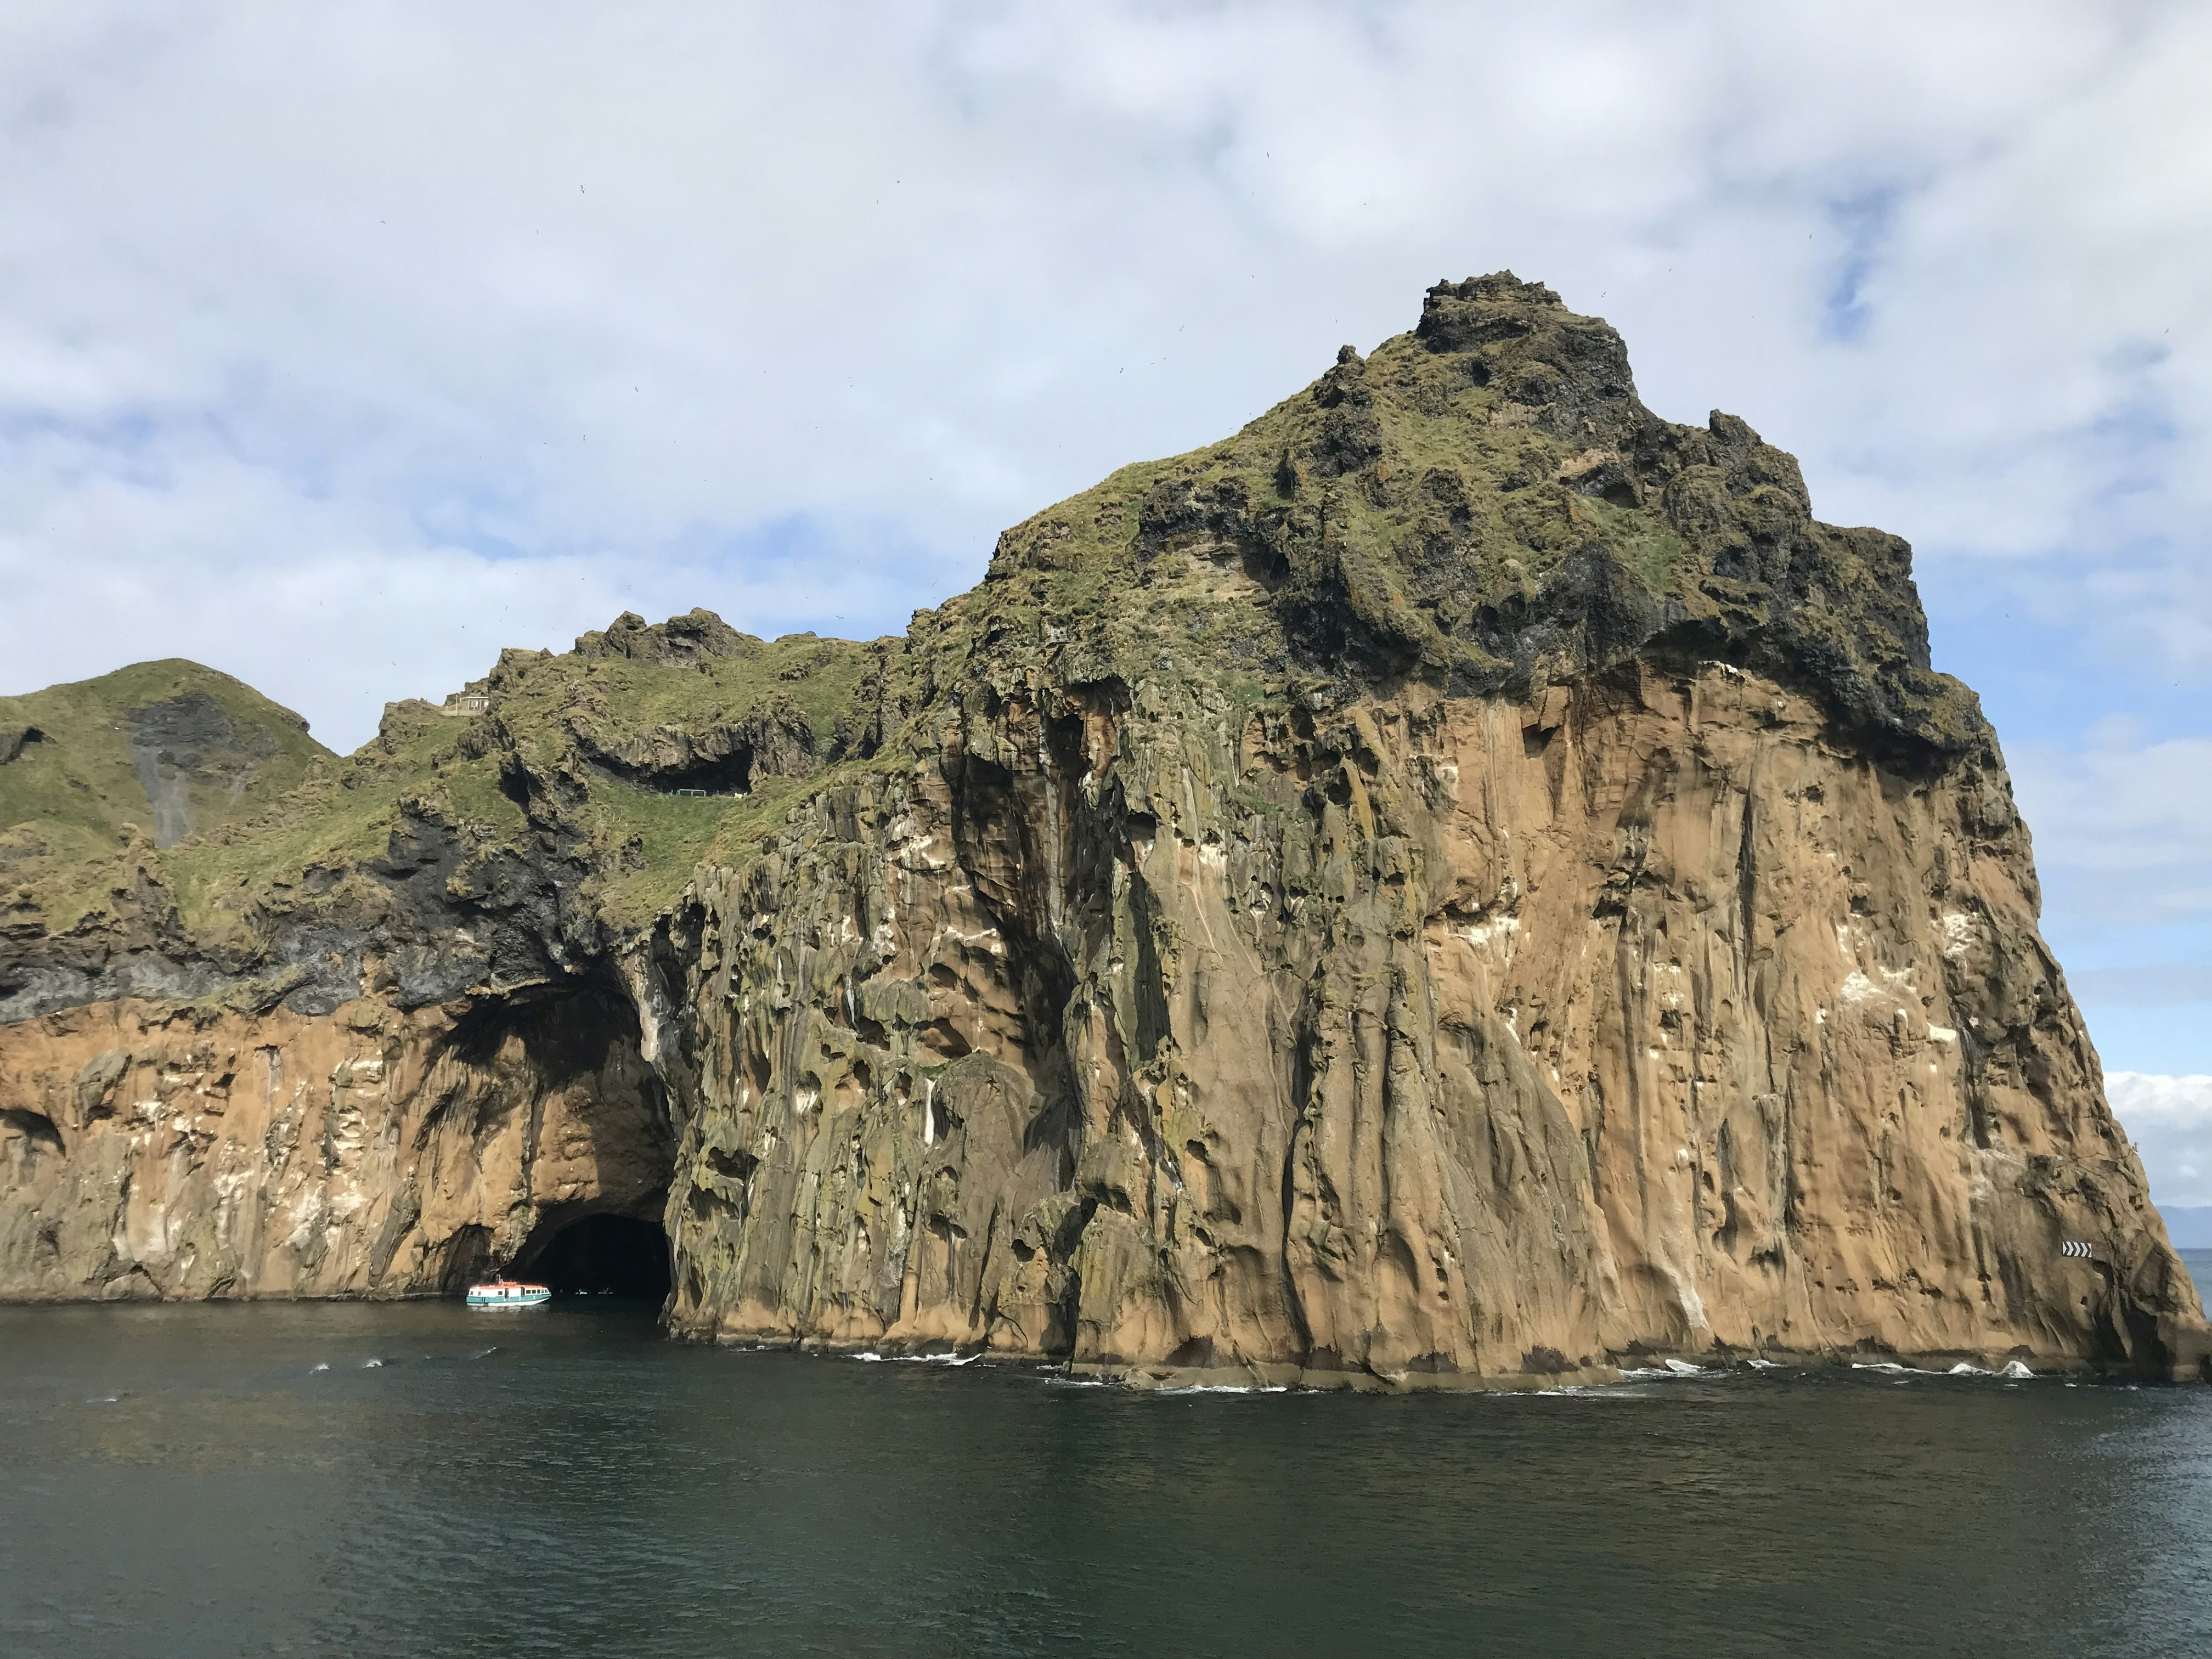 The brown, craggy cliffs of Westman Islands are full of black pockets where puffins nest and streaked with small white patches of guano. The islands are topped with green on the very top layer of the rock, and are surrounded by deep blueish green water. A small blue and white boat sales into a cave or inlet in the left of the frame.